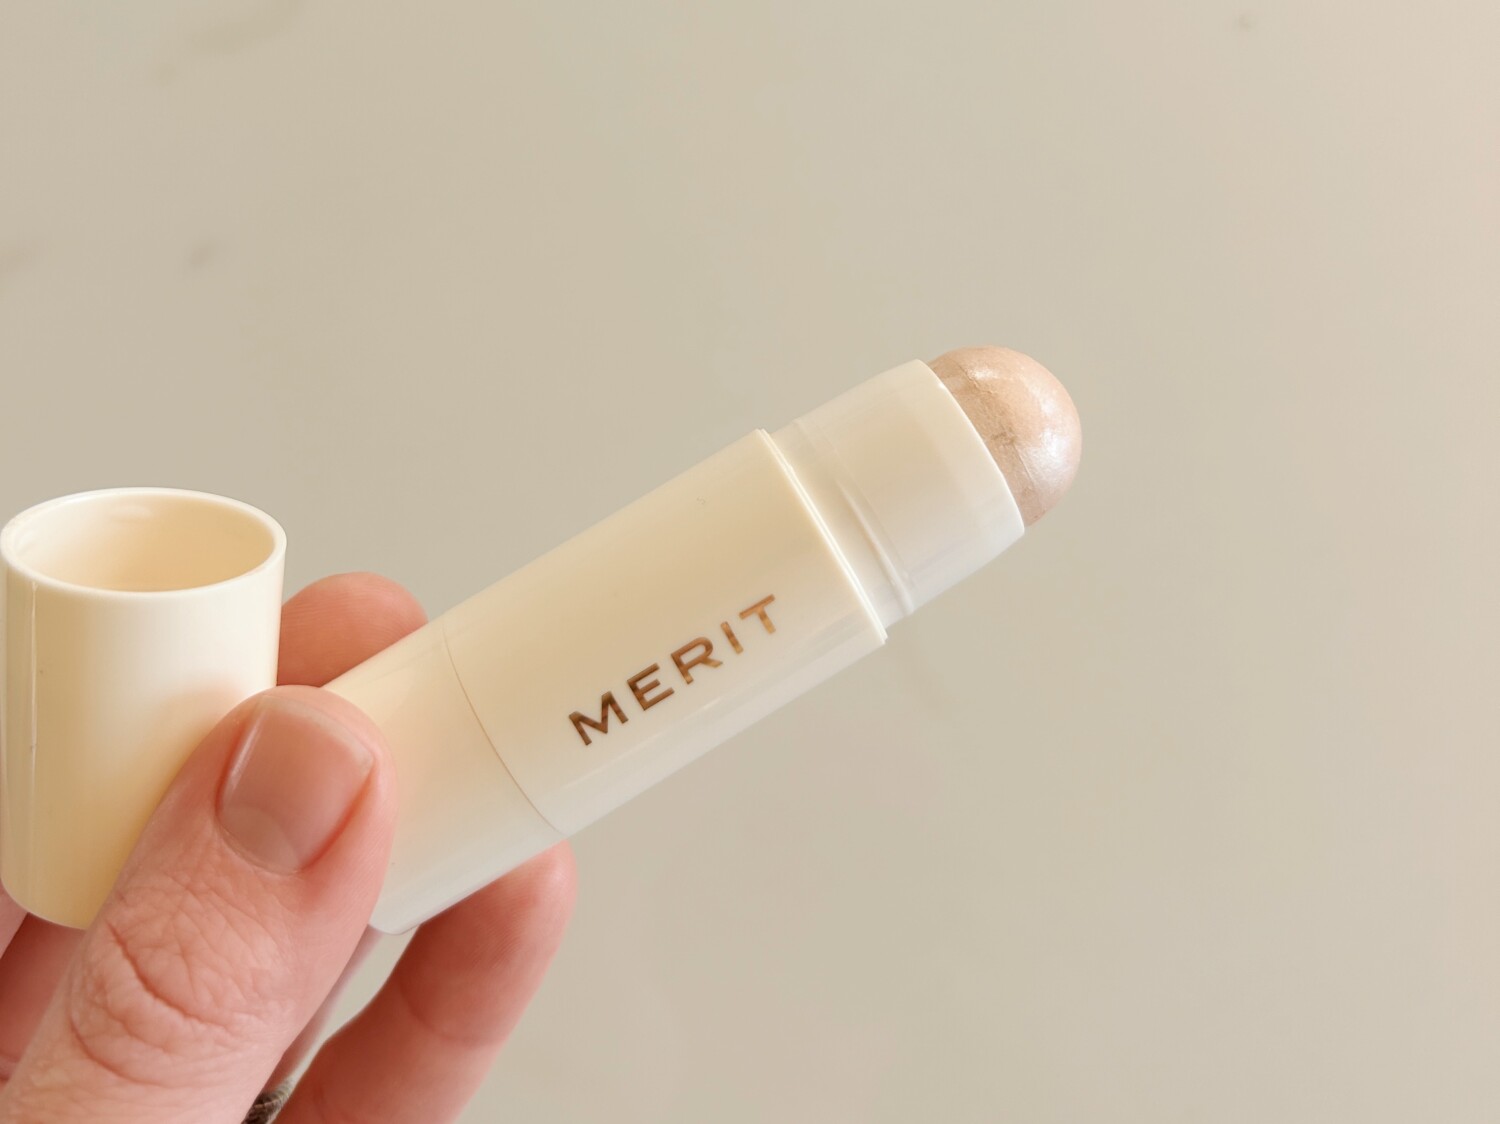 Day Glow Highlighting Balm by Merrit Beauty